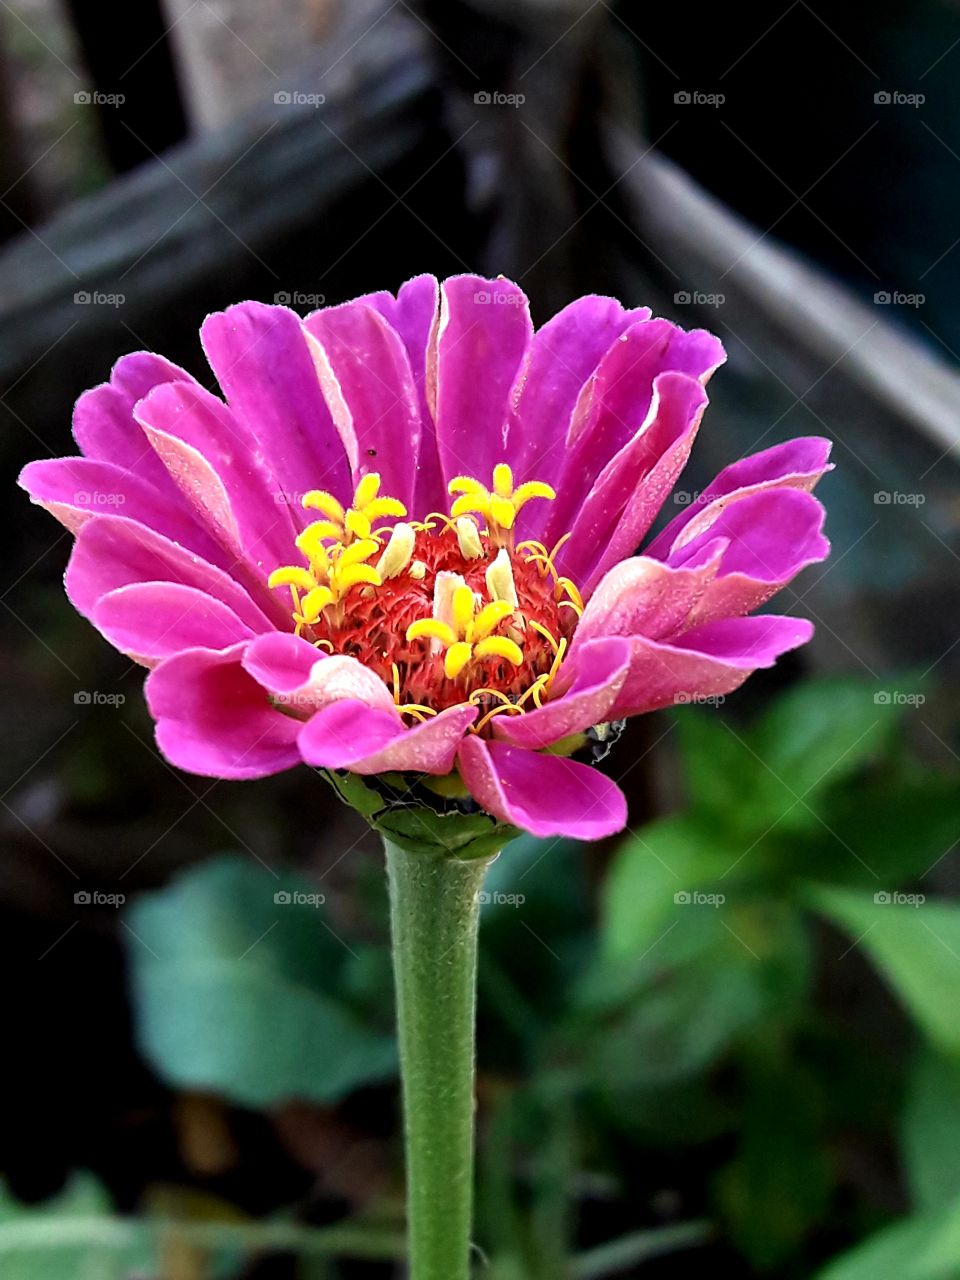 A pink and yeallow colour blooming flower